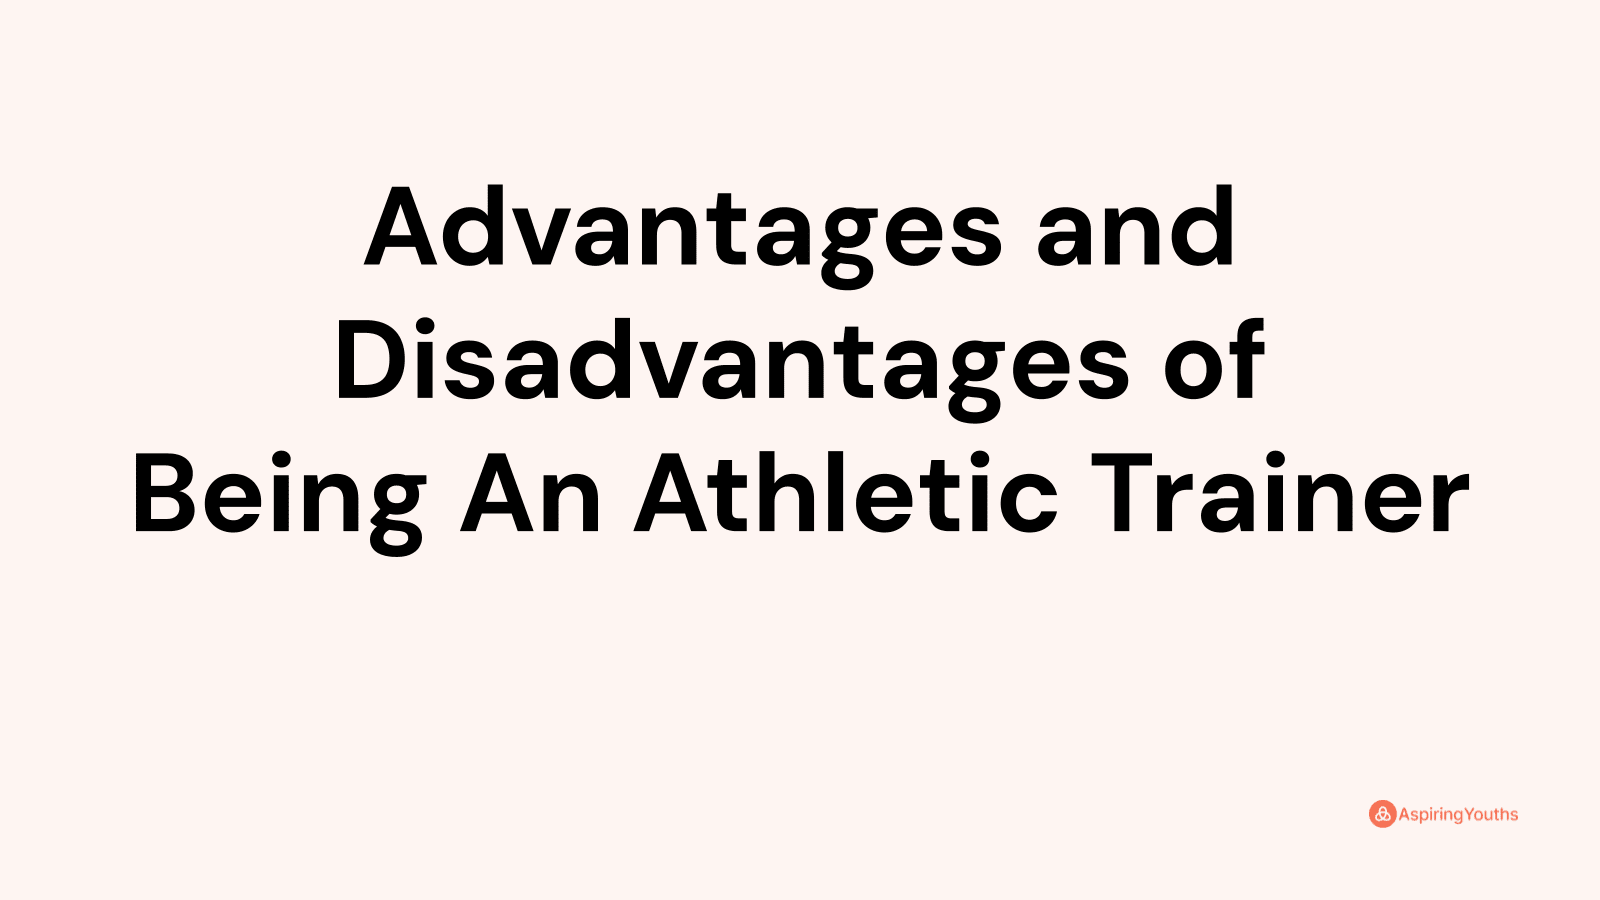 Advantages and disadvantages of Being An Athletic Trainer